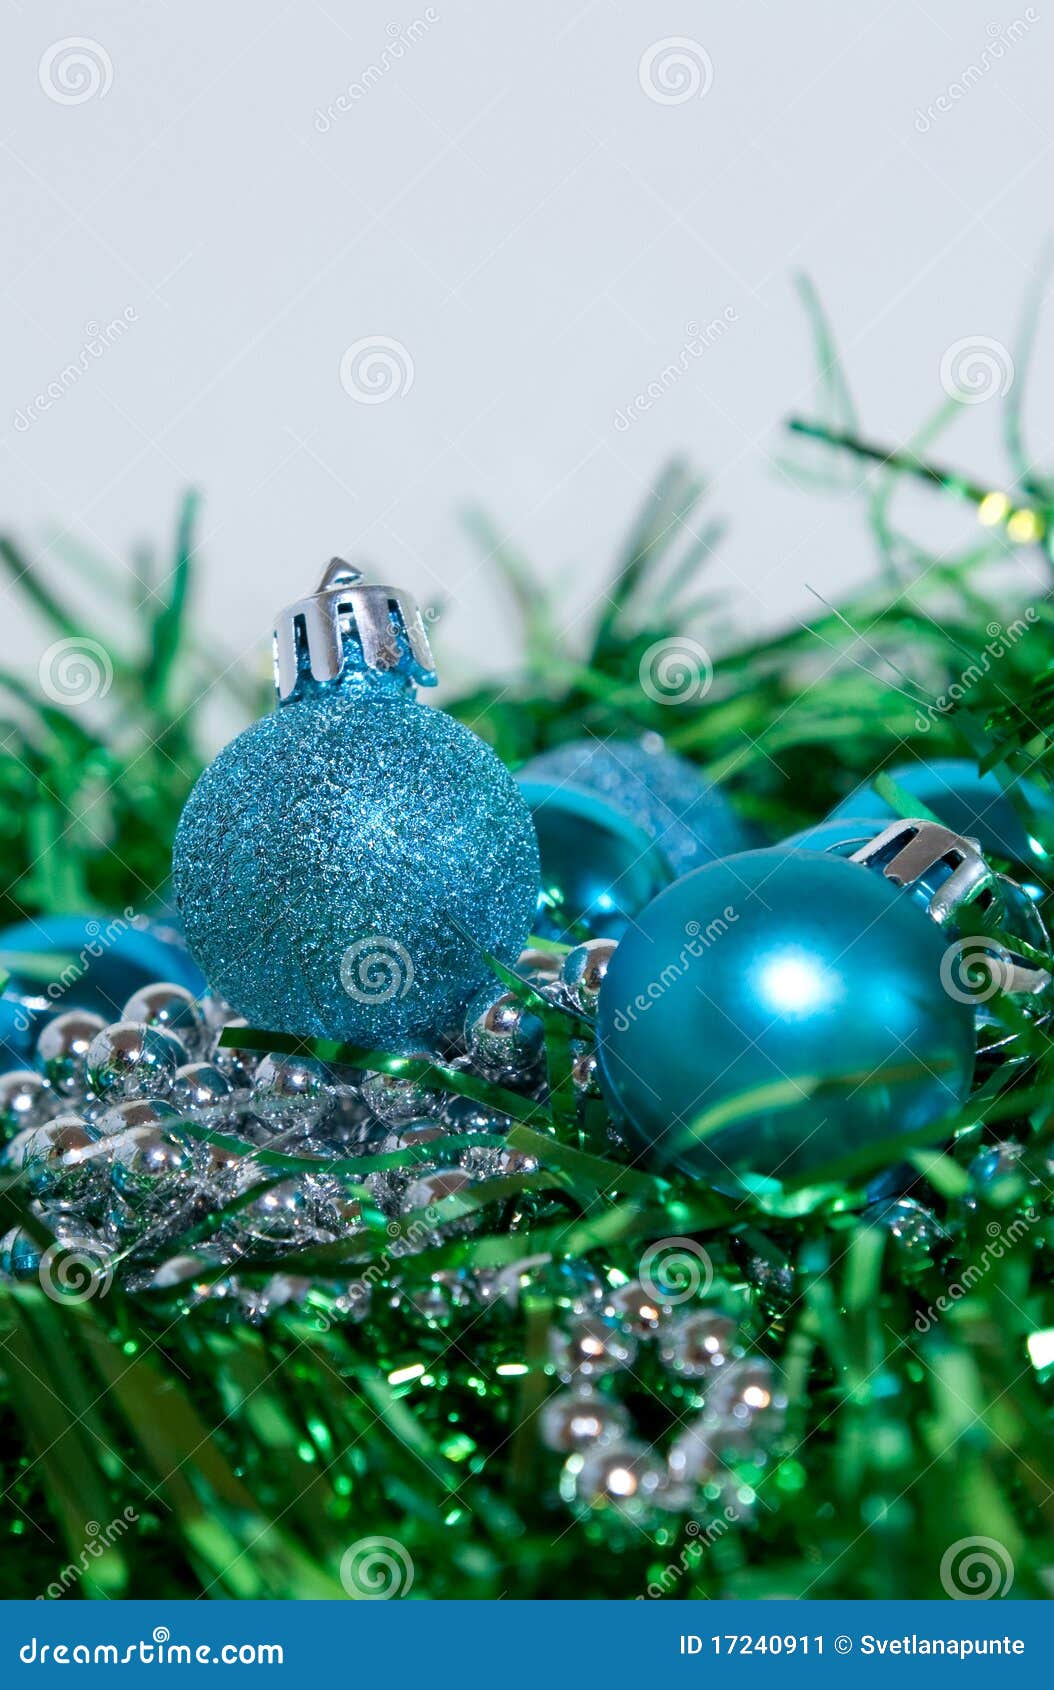 Blue And Green Christmas Decorations Stock Image - Image: 17240911